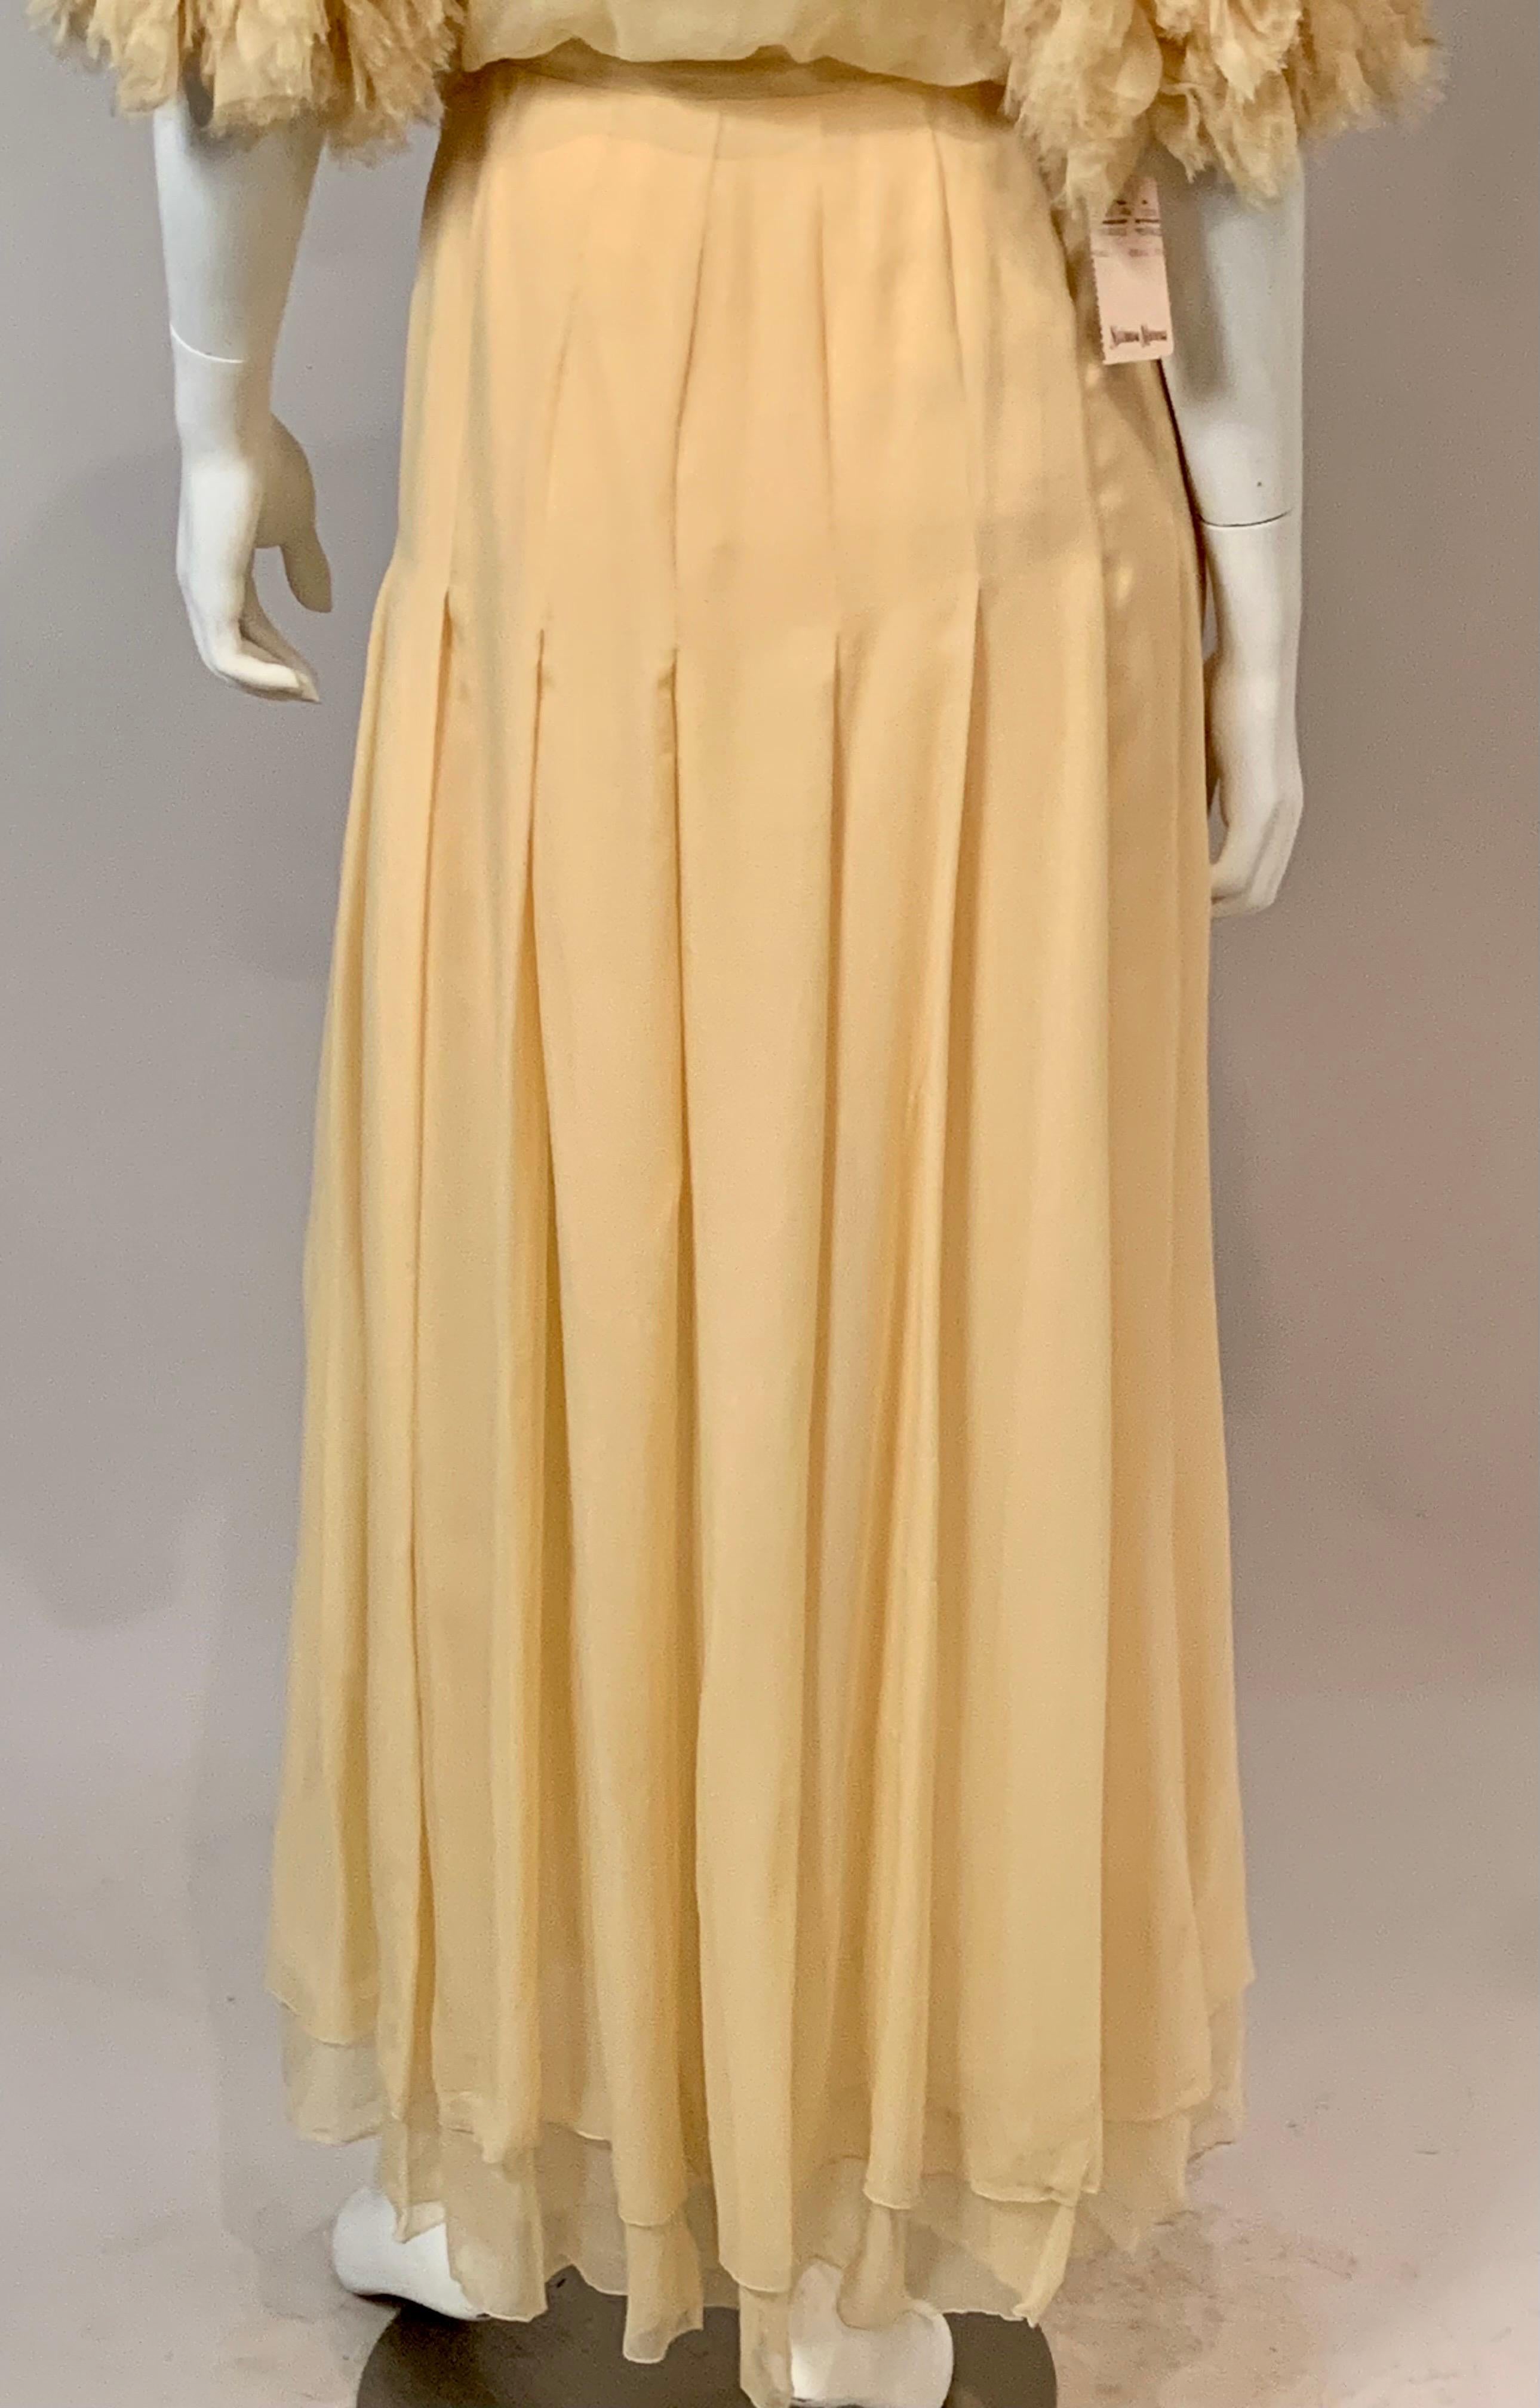 1984 Chanel by Karl Lagerfeld Butter Yellow Silk Chiffon Evening Gown Never Worn 10